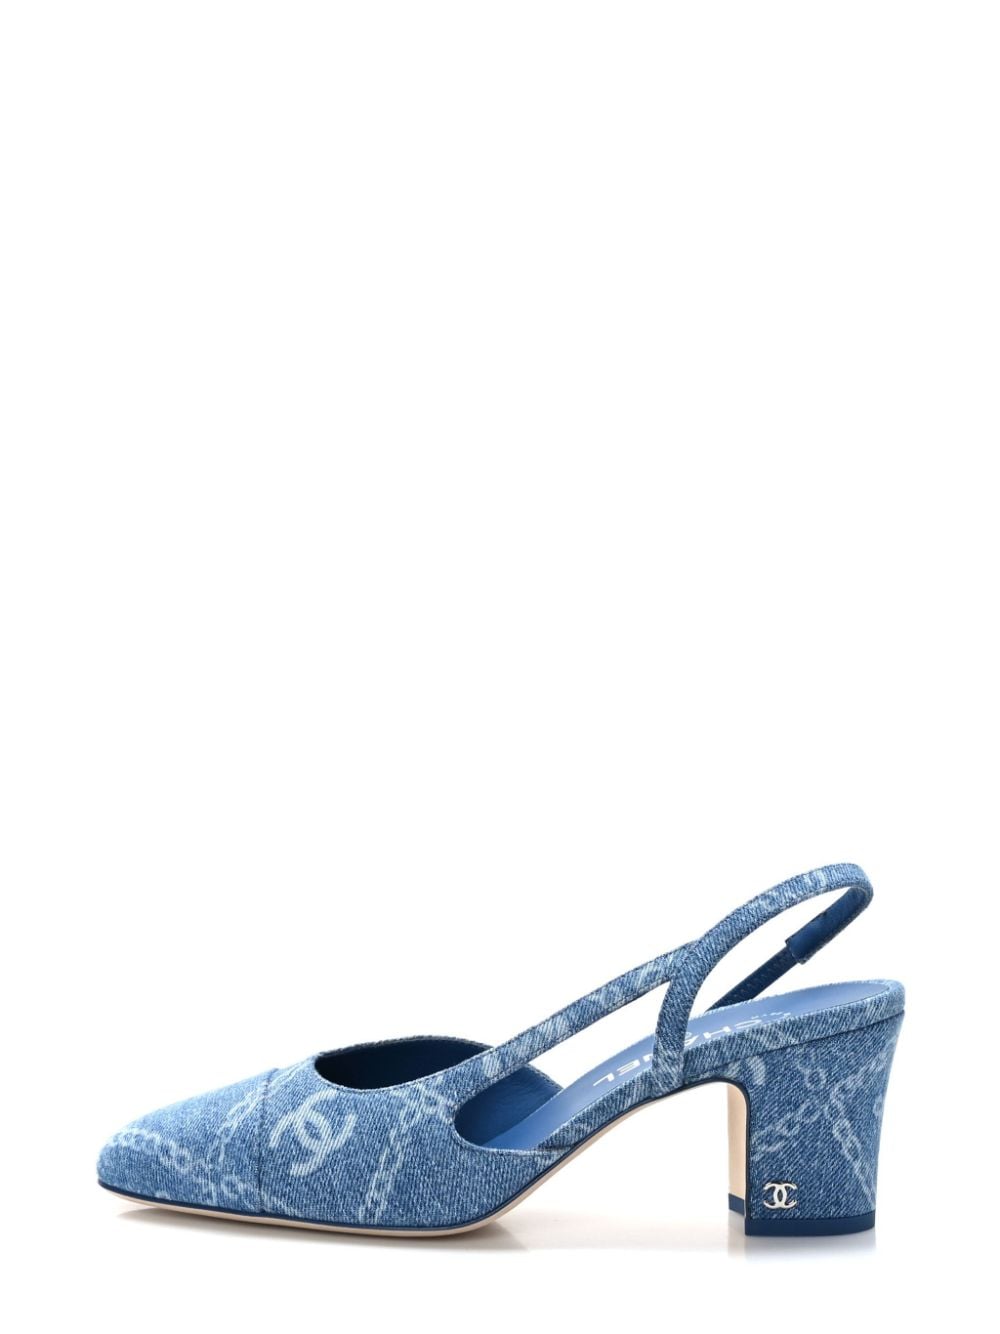 Pre-owned Chanel Cap Toe Cc Slingback Pumps In Blue